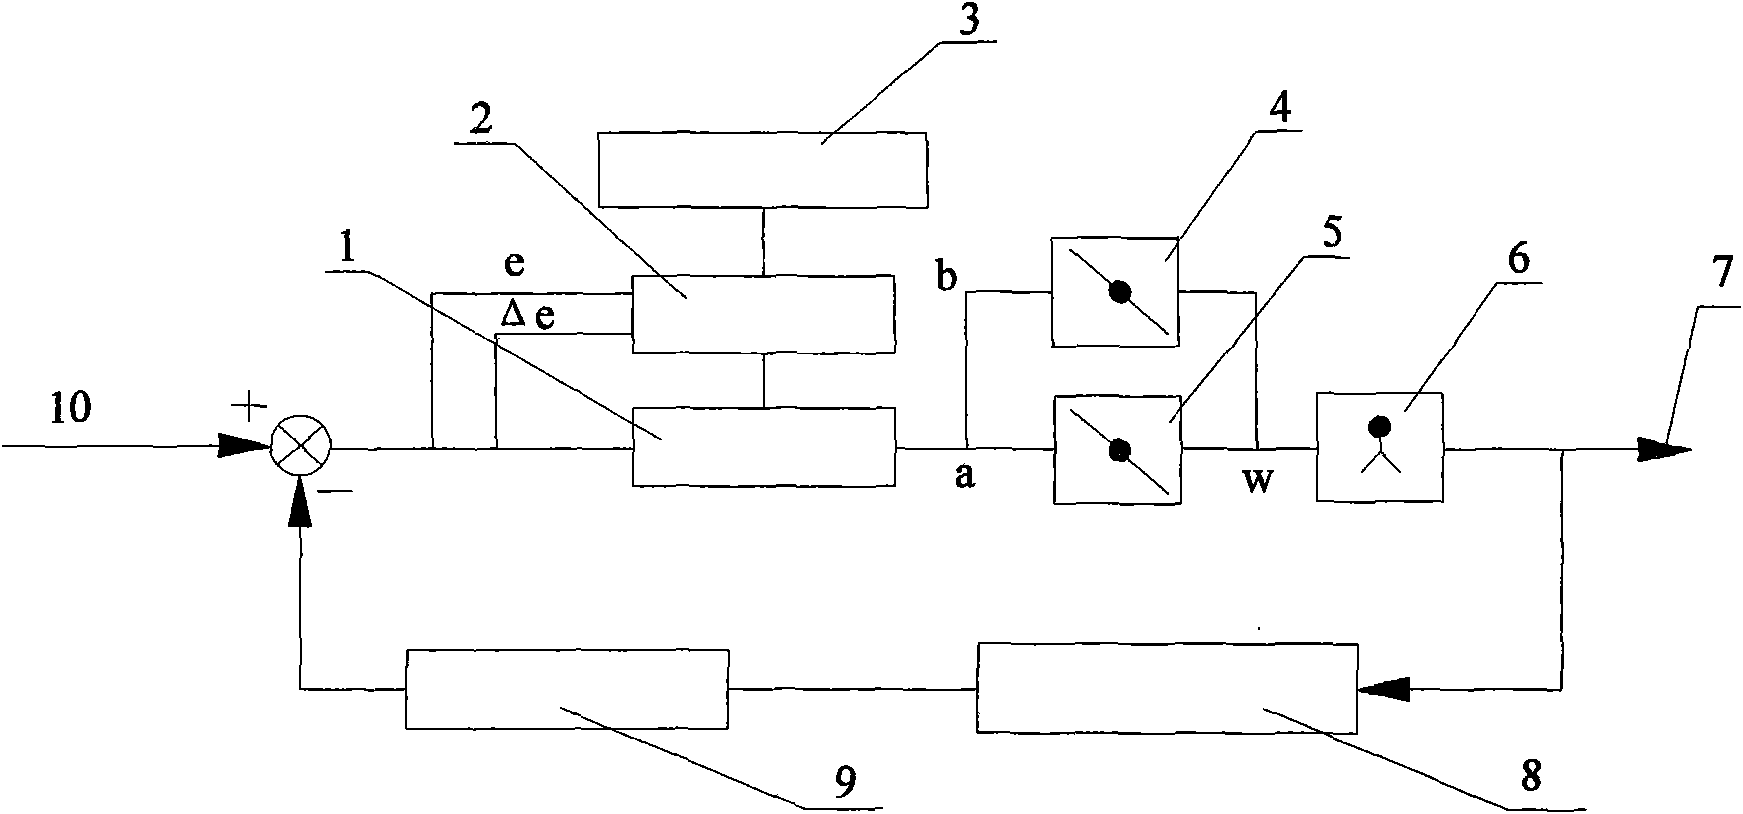 Air-conditioning control technique with variable air quantity based on enthalpy value control